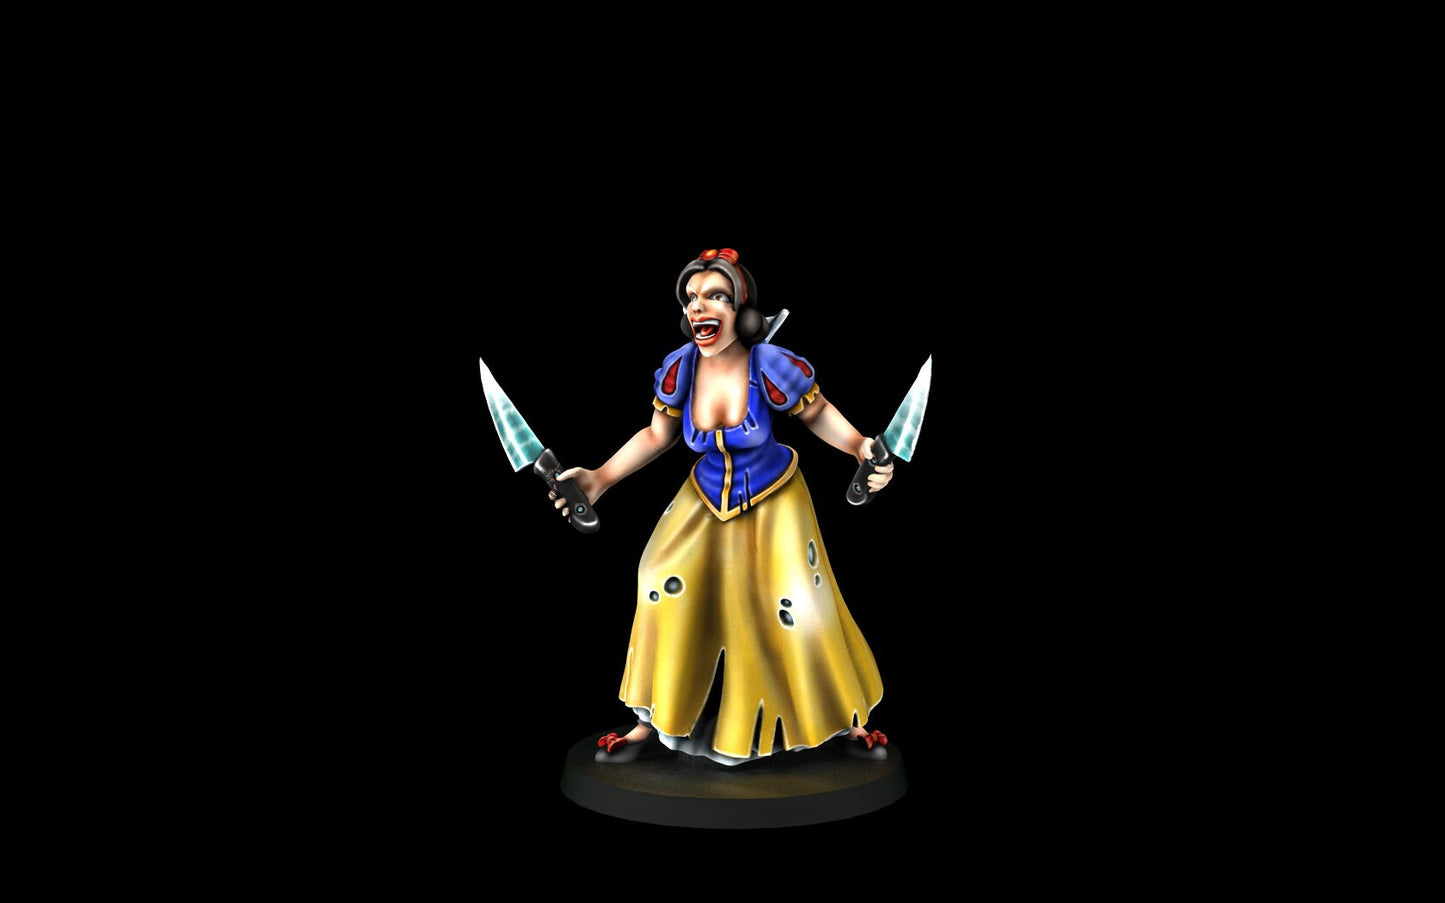 Snow white and the seven Dwarves (32mm) - Angry Princesses - ideal for Dungeons and Dragons and other Tabletop RPGs